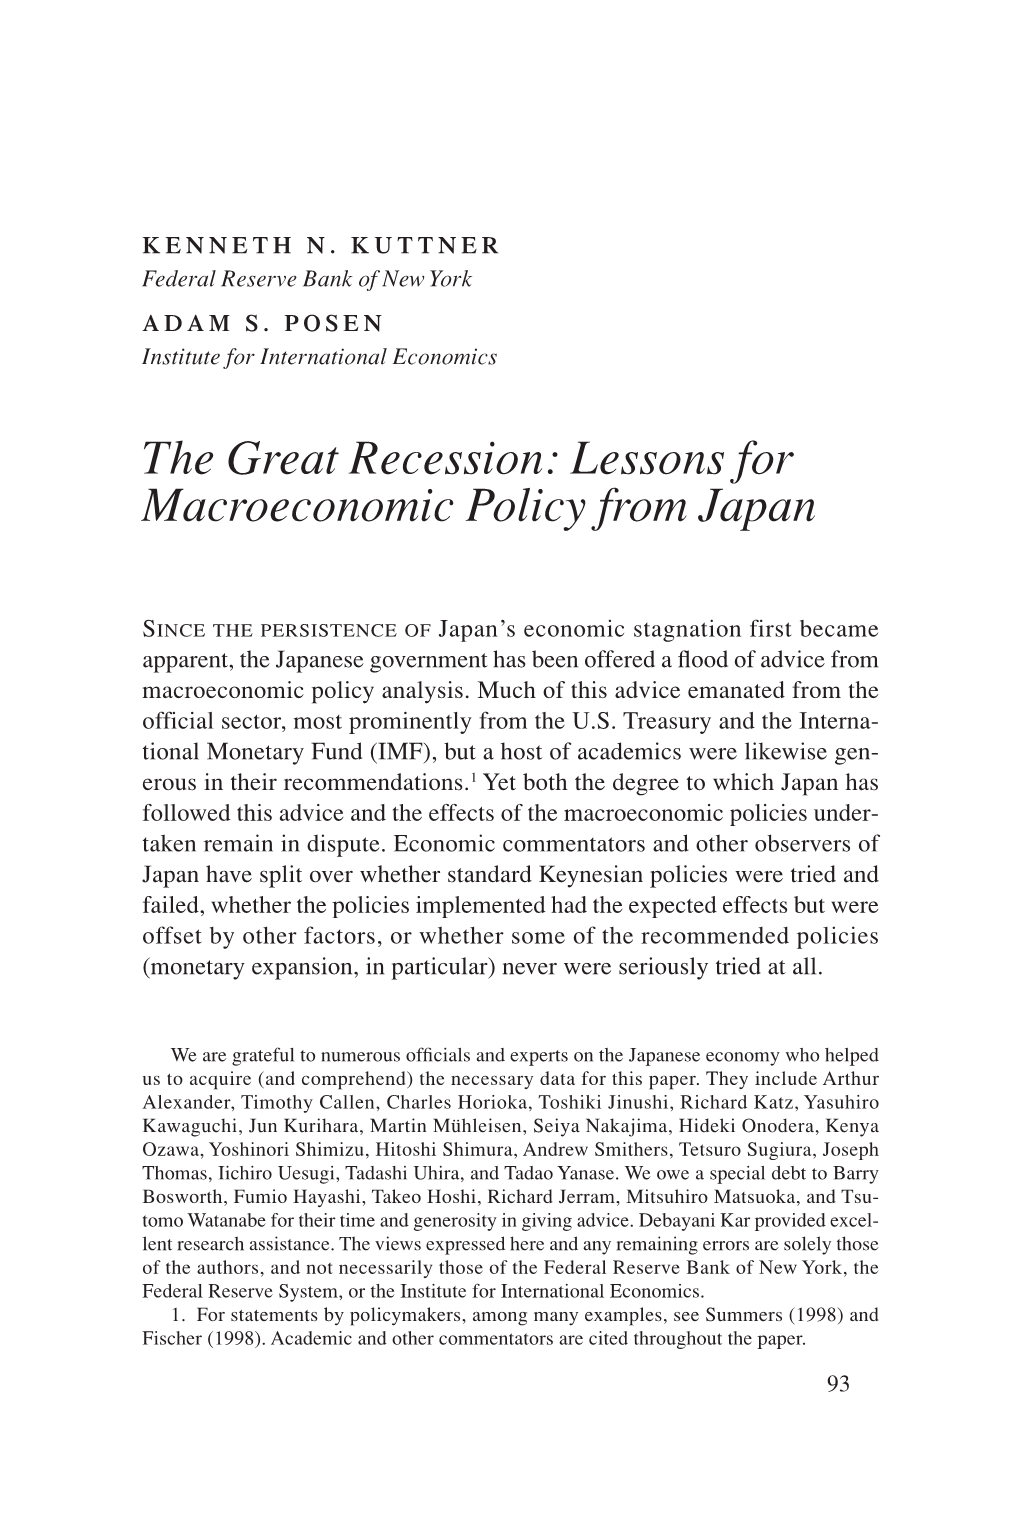 The Great Recession: Lessons for Macroeconomic Policy from Japan